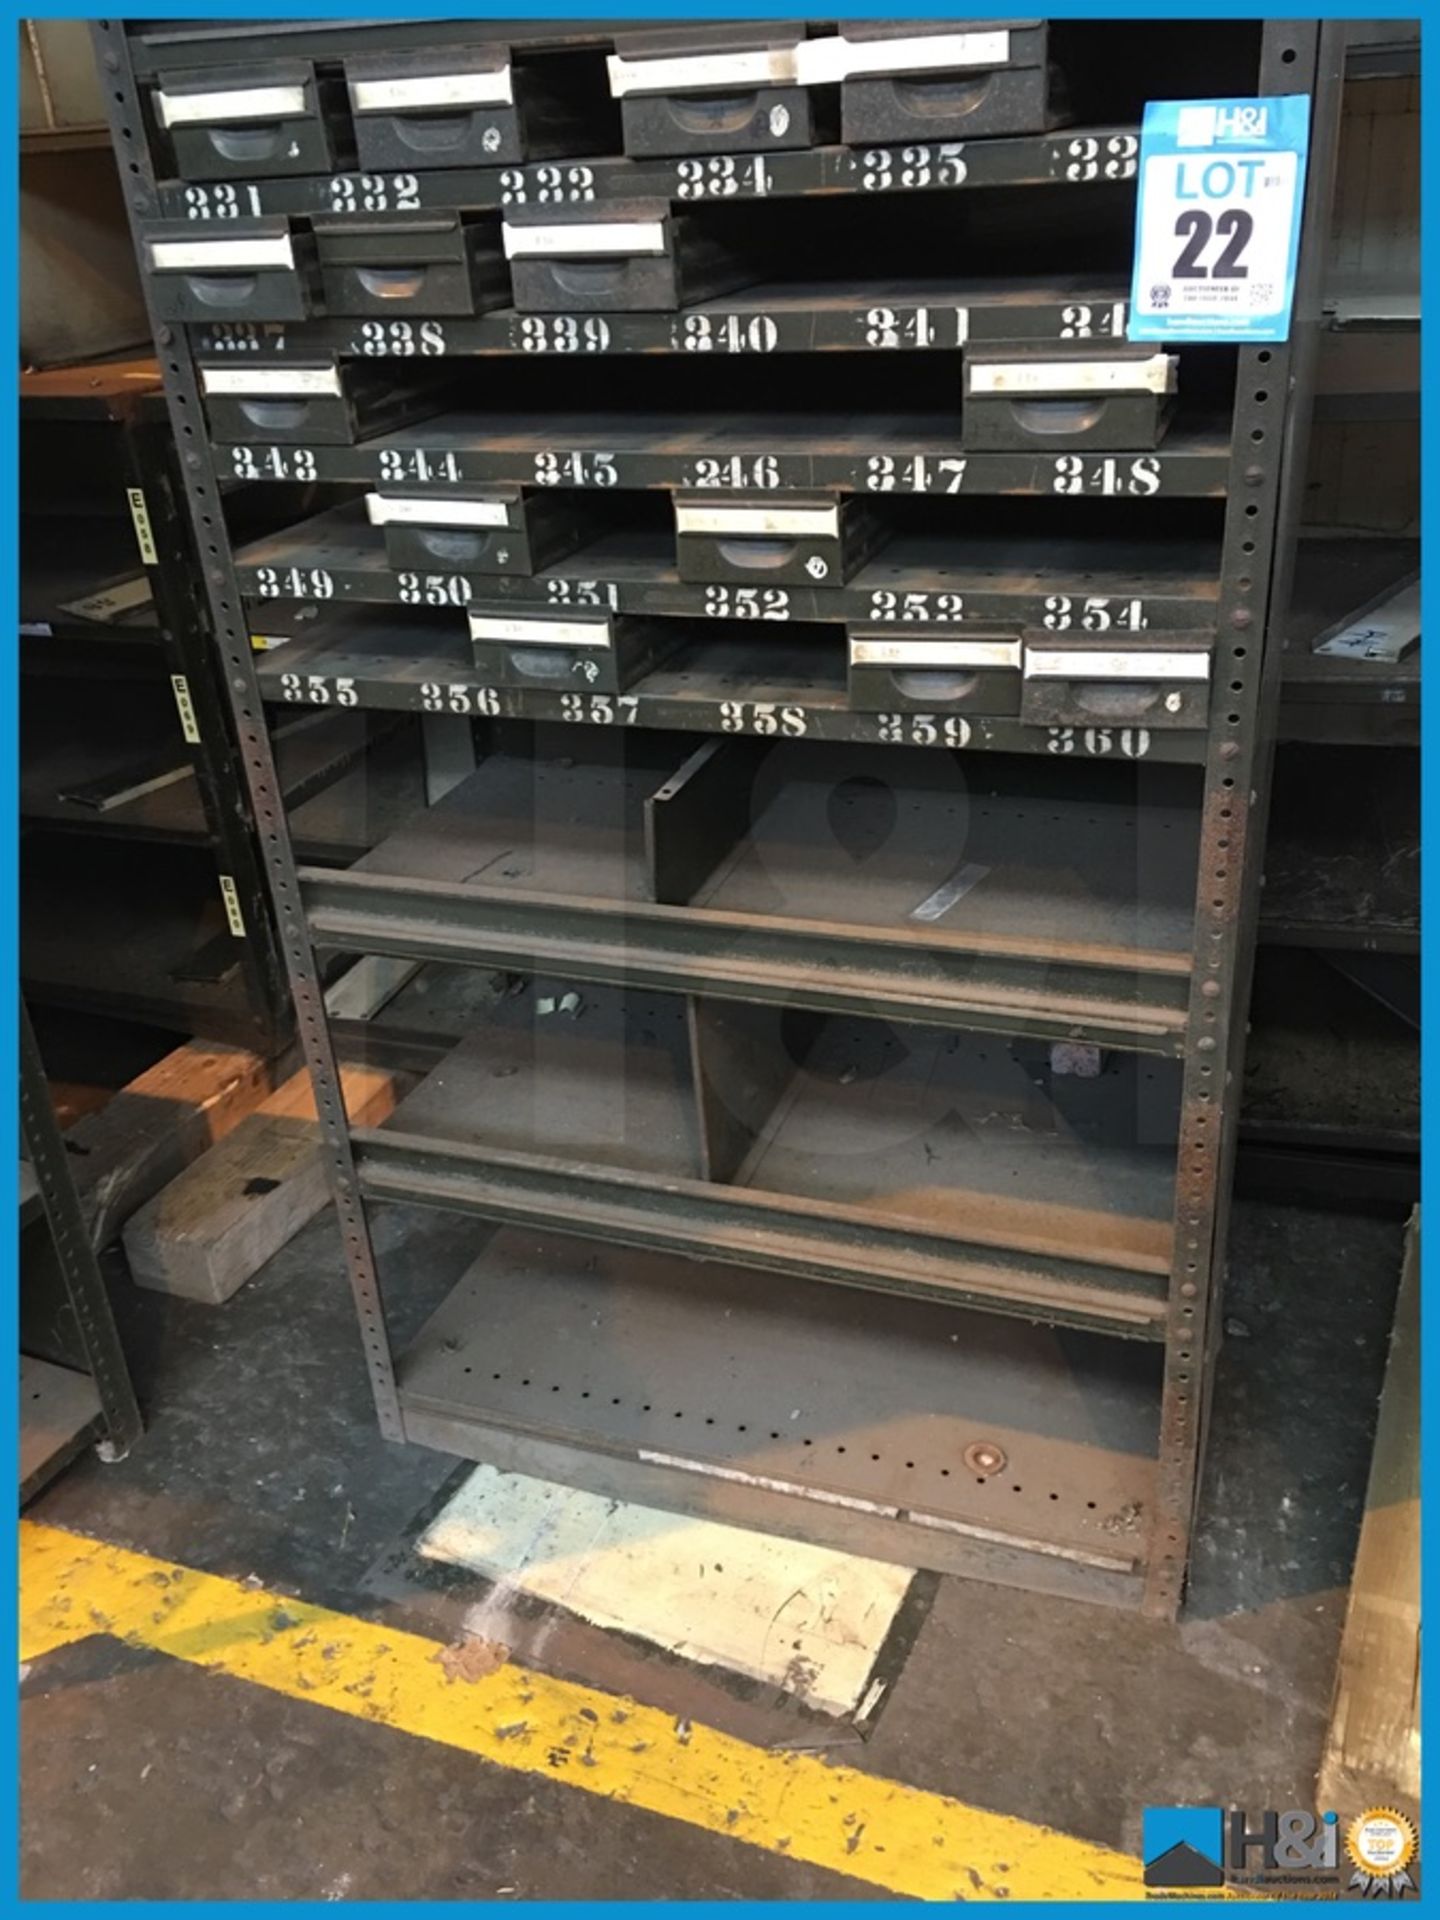 Large metal storage units with drawers and shelves. Very industrial appearance. Approx 7ft x 3ft x - Image 2 of 2